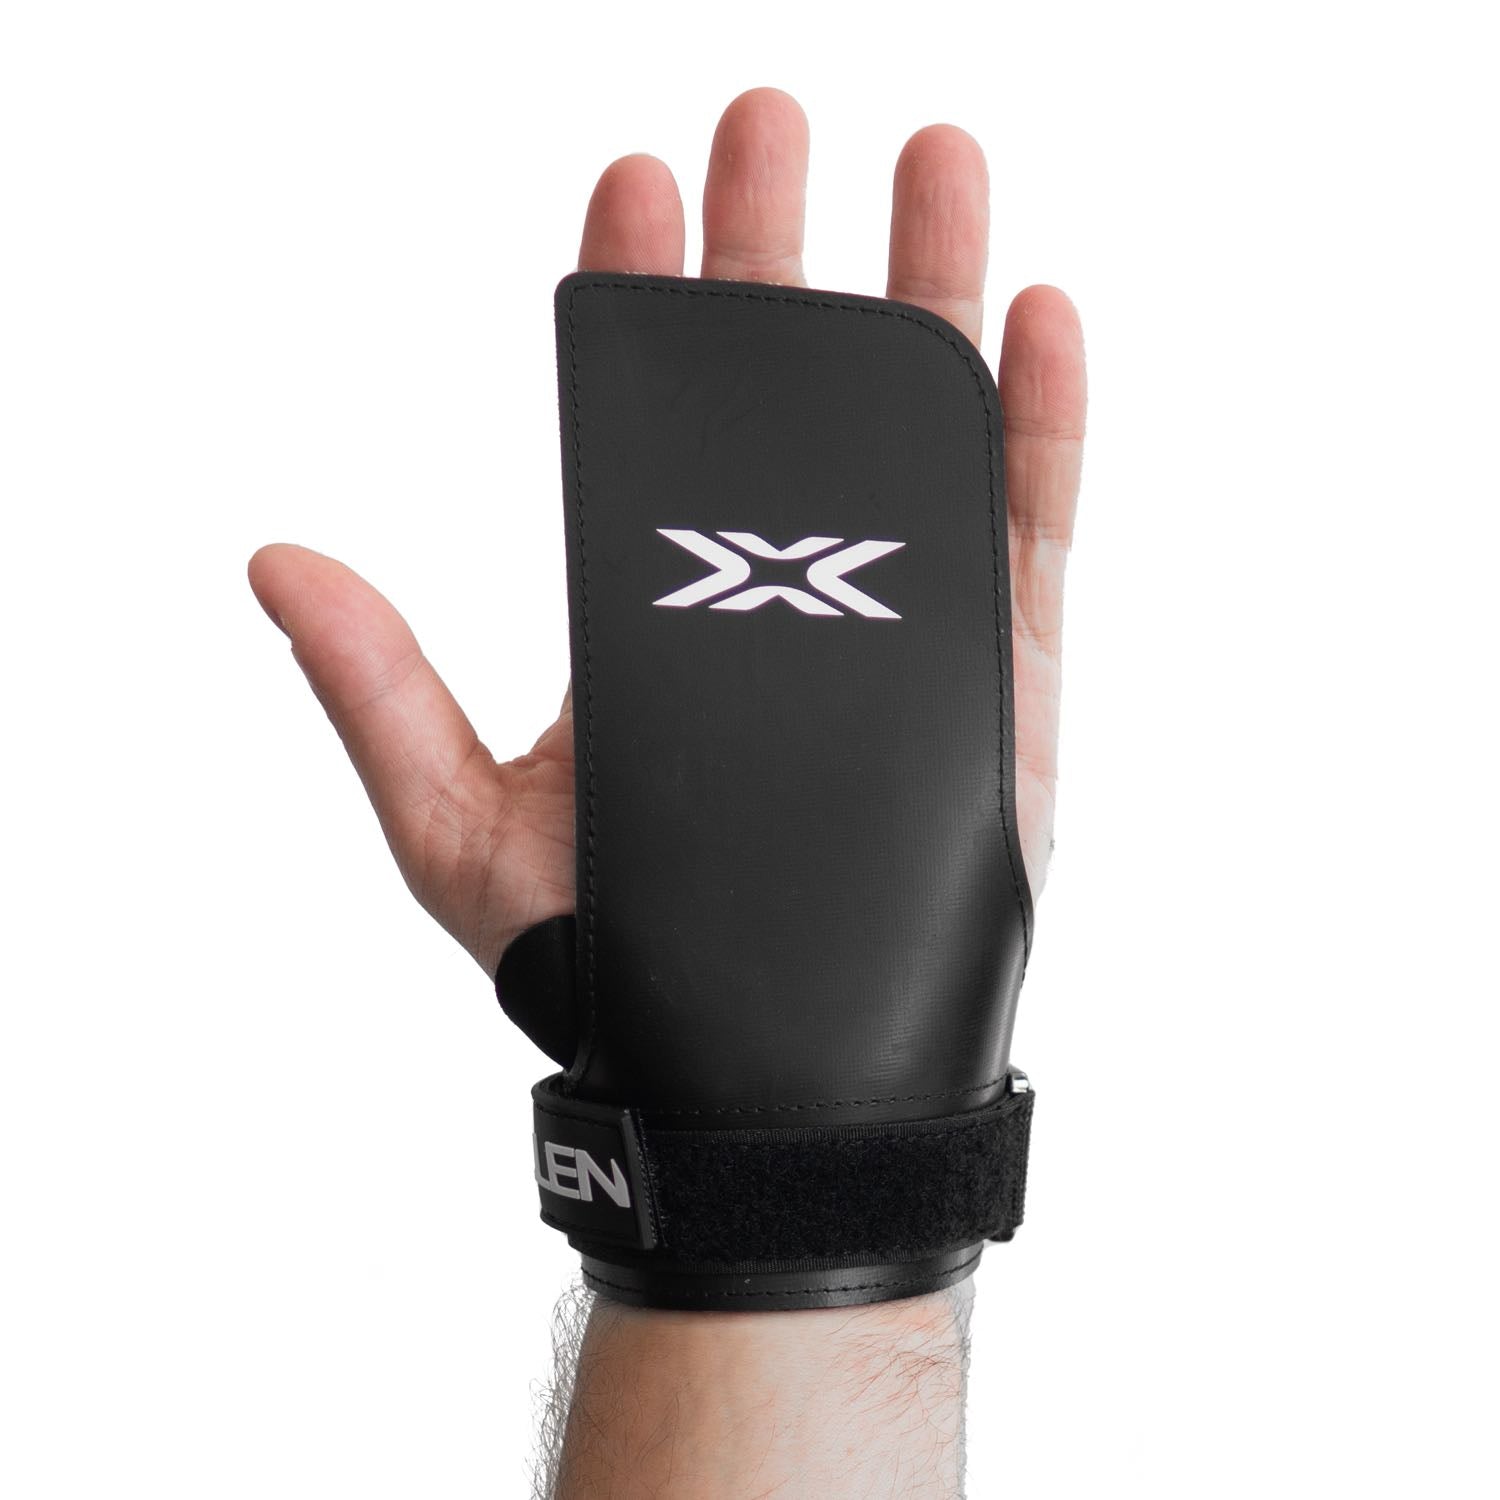 Seal X4 Fingerless Rubber Crossfit Gymnastic Hand Grips - worn on hand single